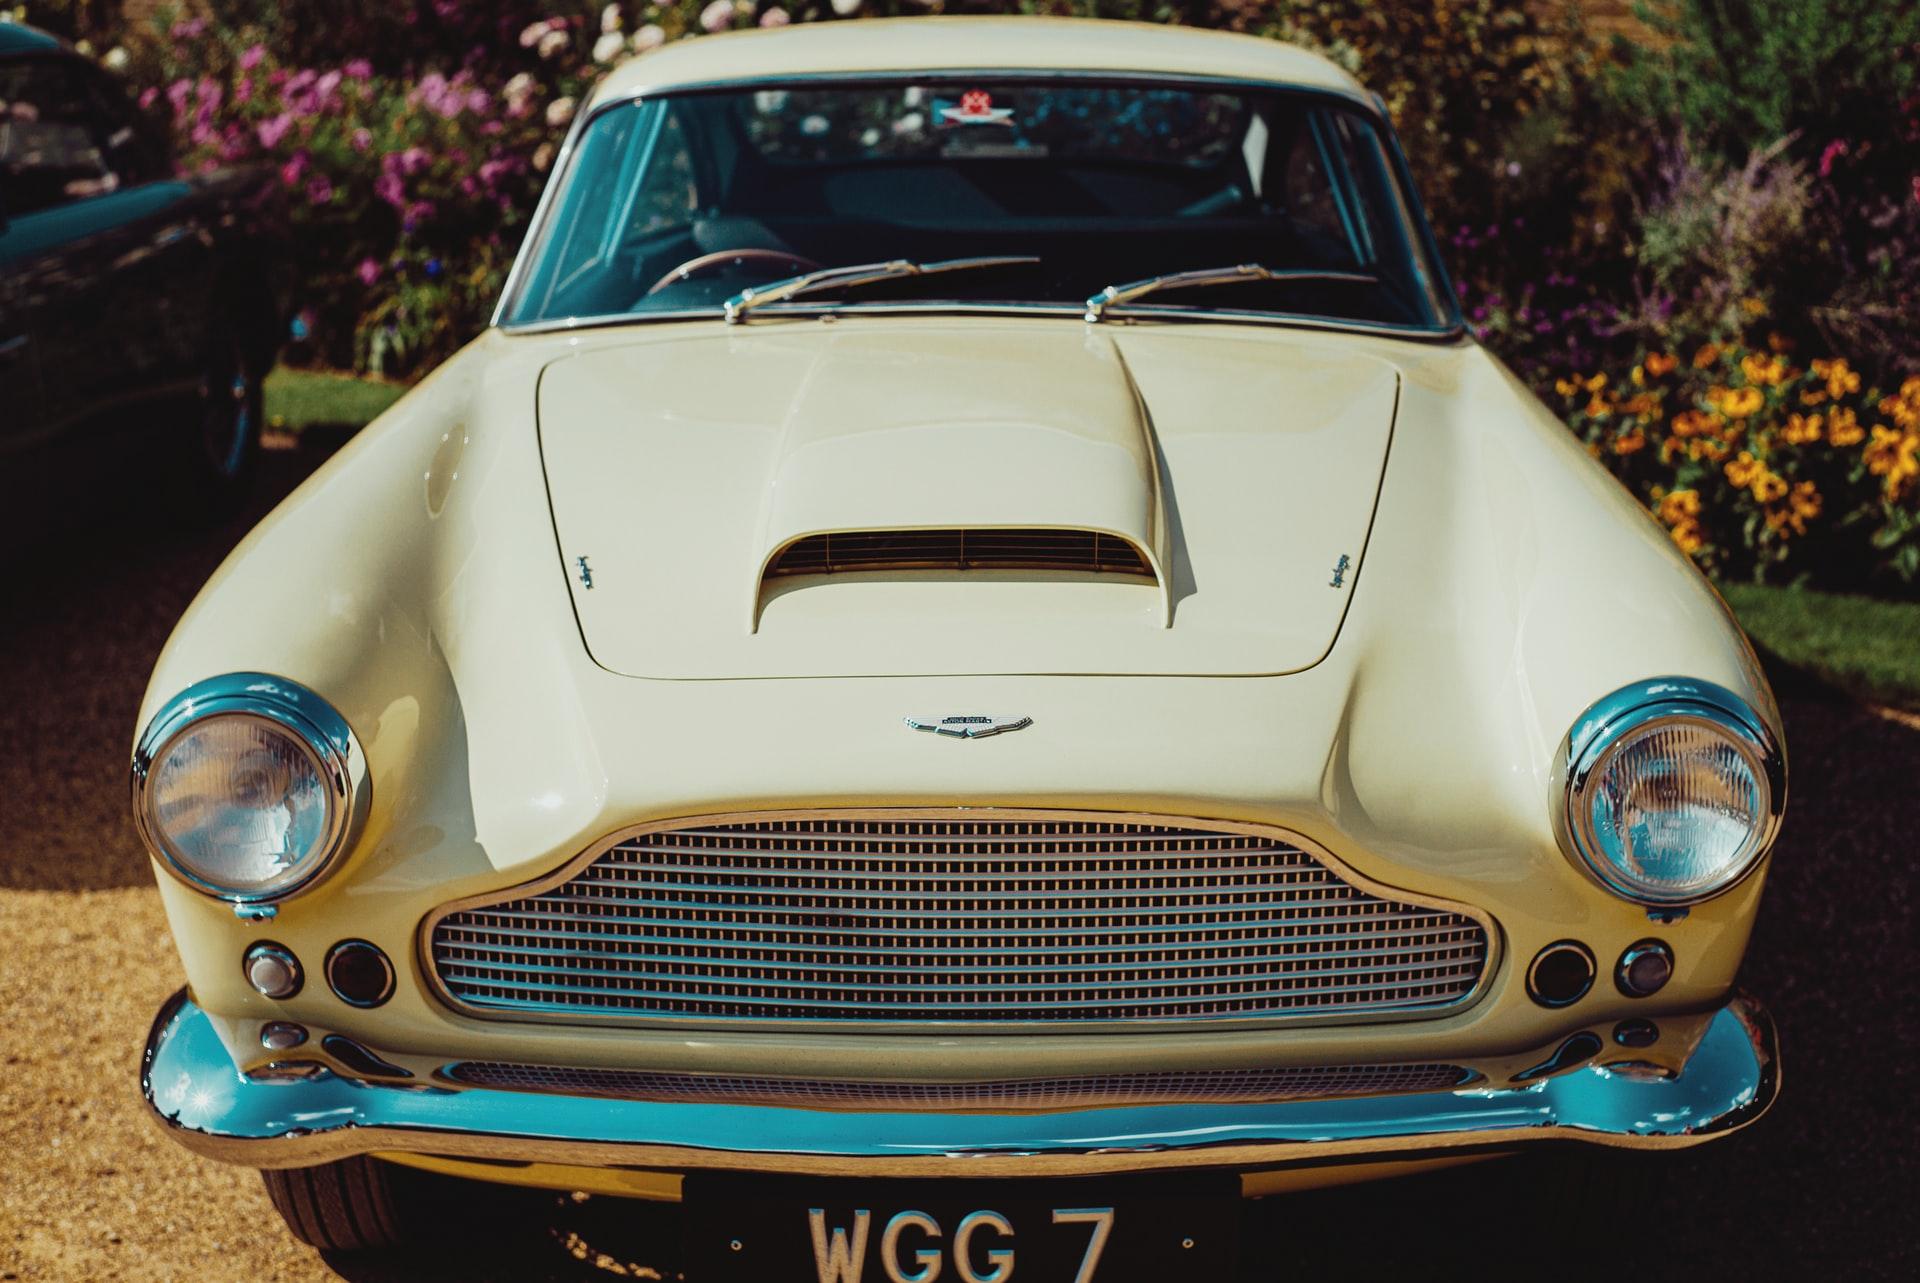 If you love James Bond, you’ll love re-exploring the iconic Aston Martin DB5.